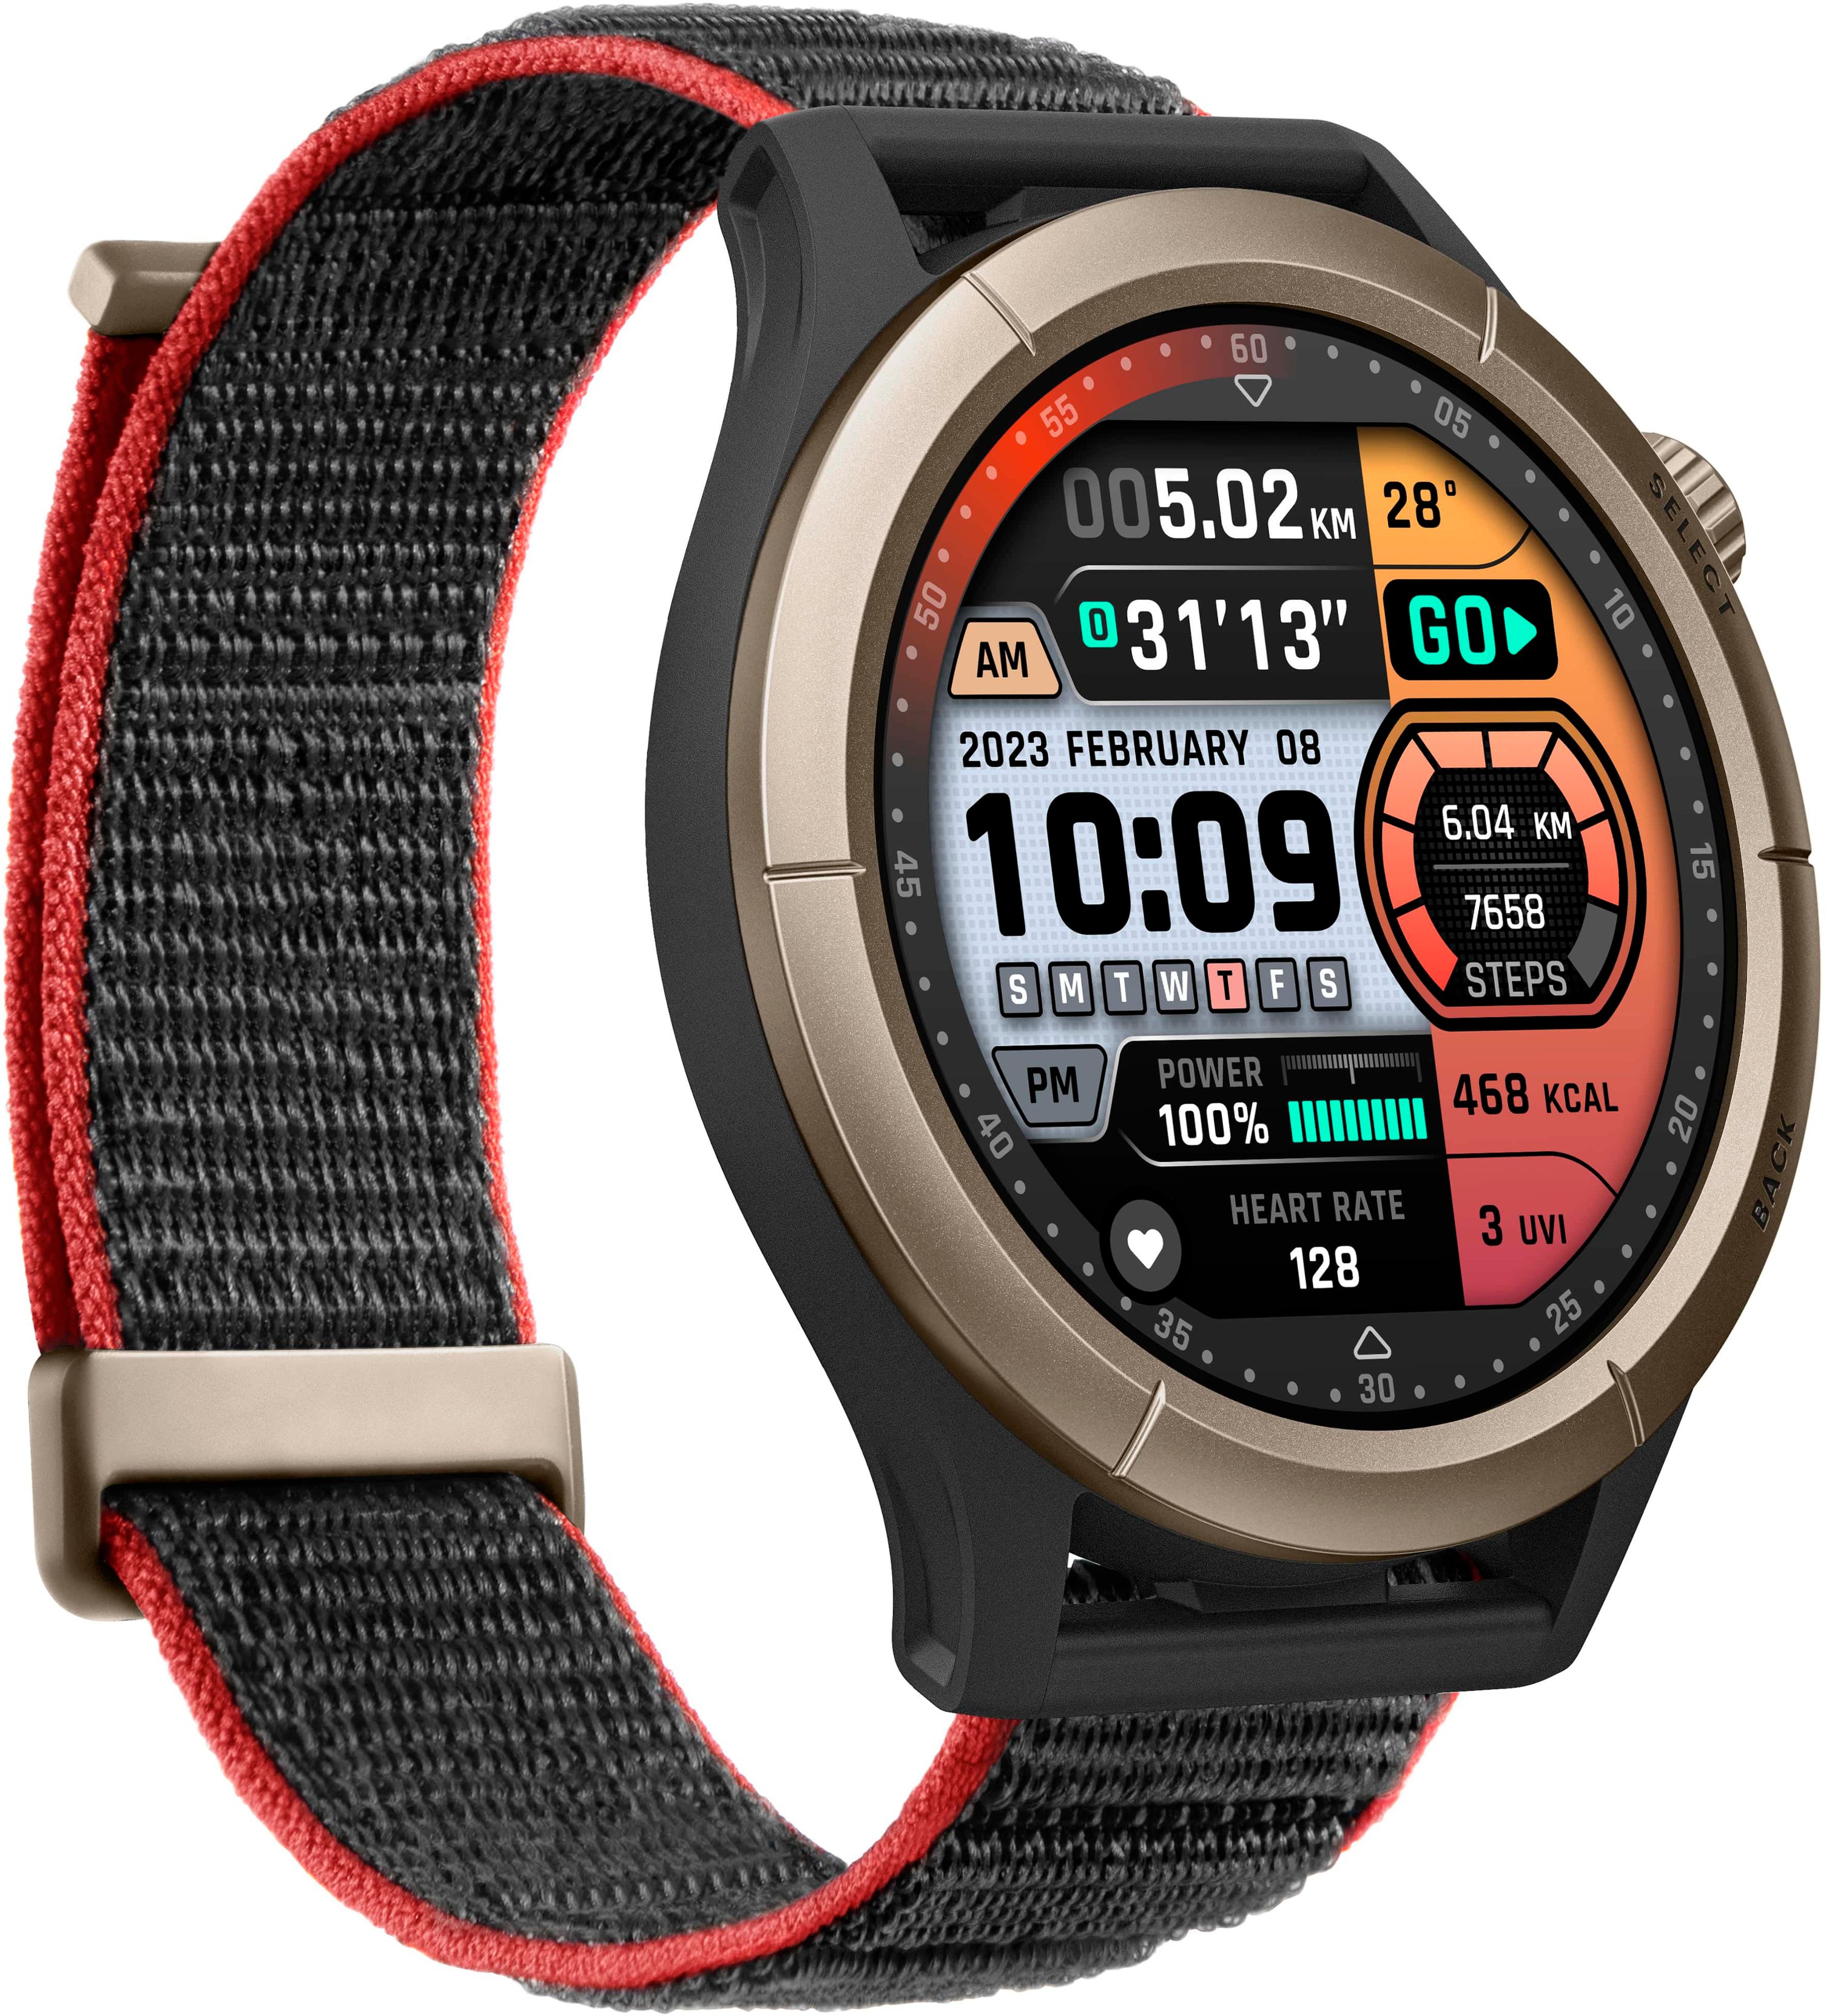 Amazfit Cheetah Pro Review: The Almost Perfect Sporty Smartwatch